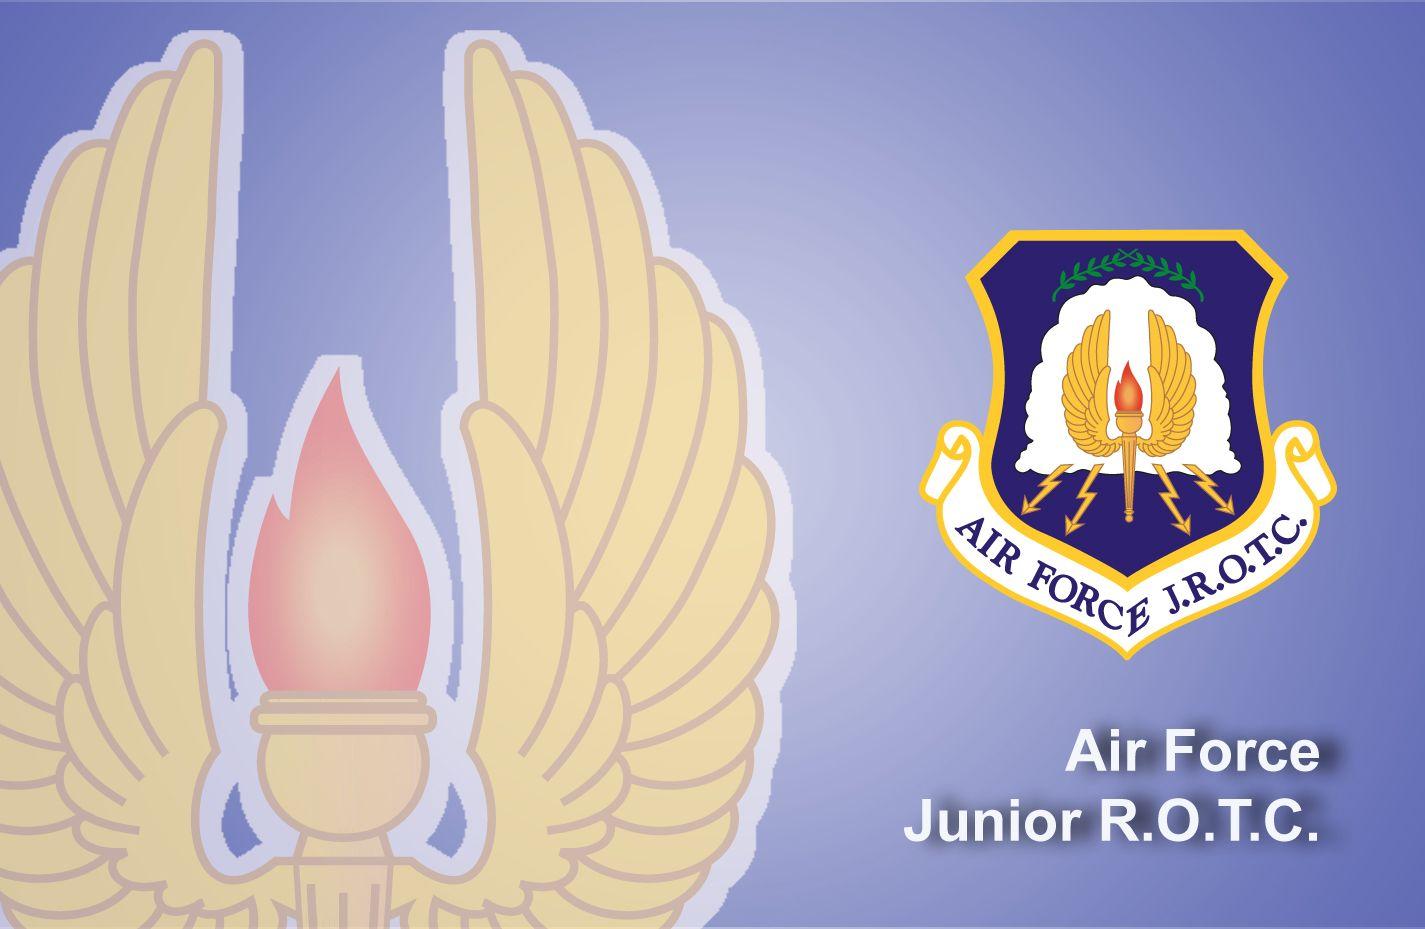 AFJROTC Logo - Air Force Junior Reserve Officer Training Corps > U.S. Air Force